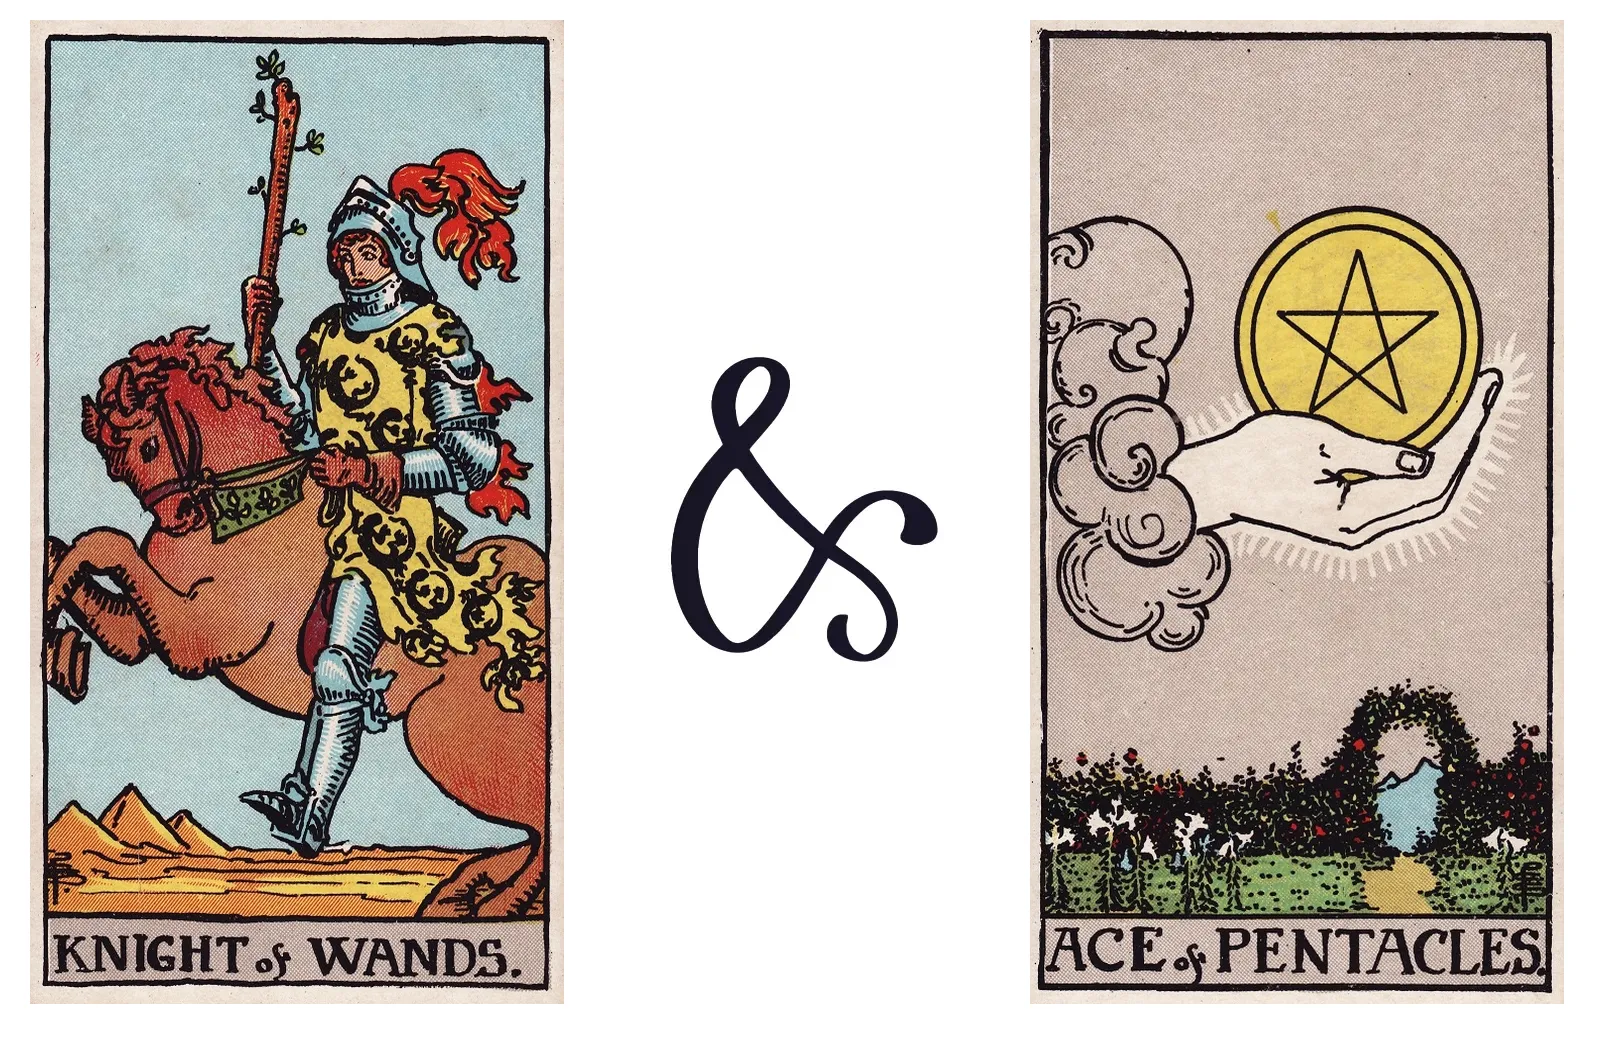 Knight of Wands and Ace of Pentacles